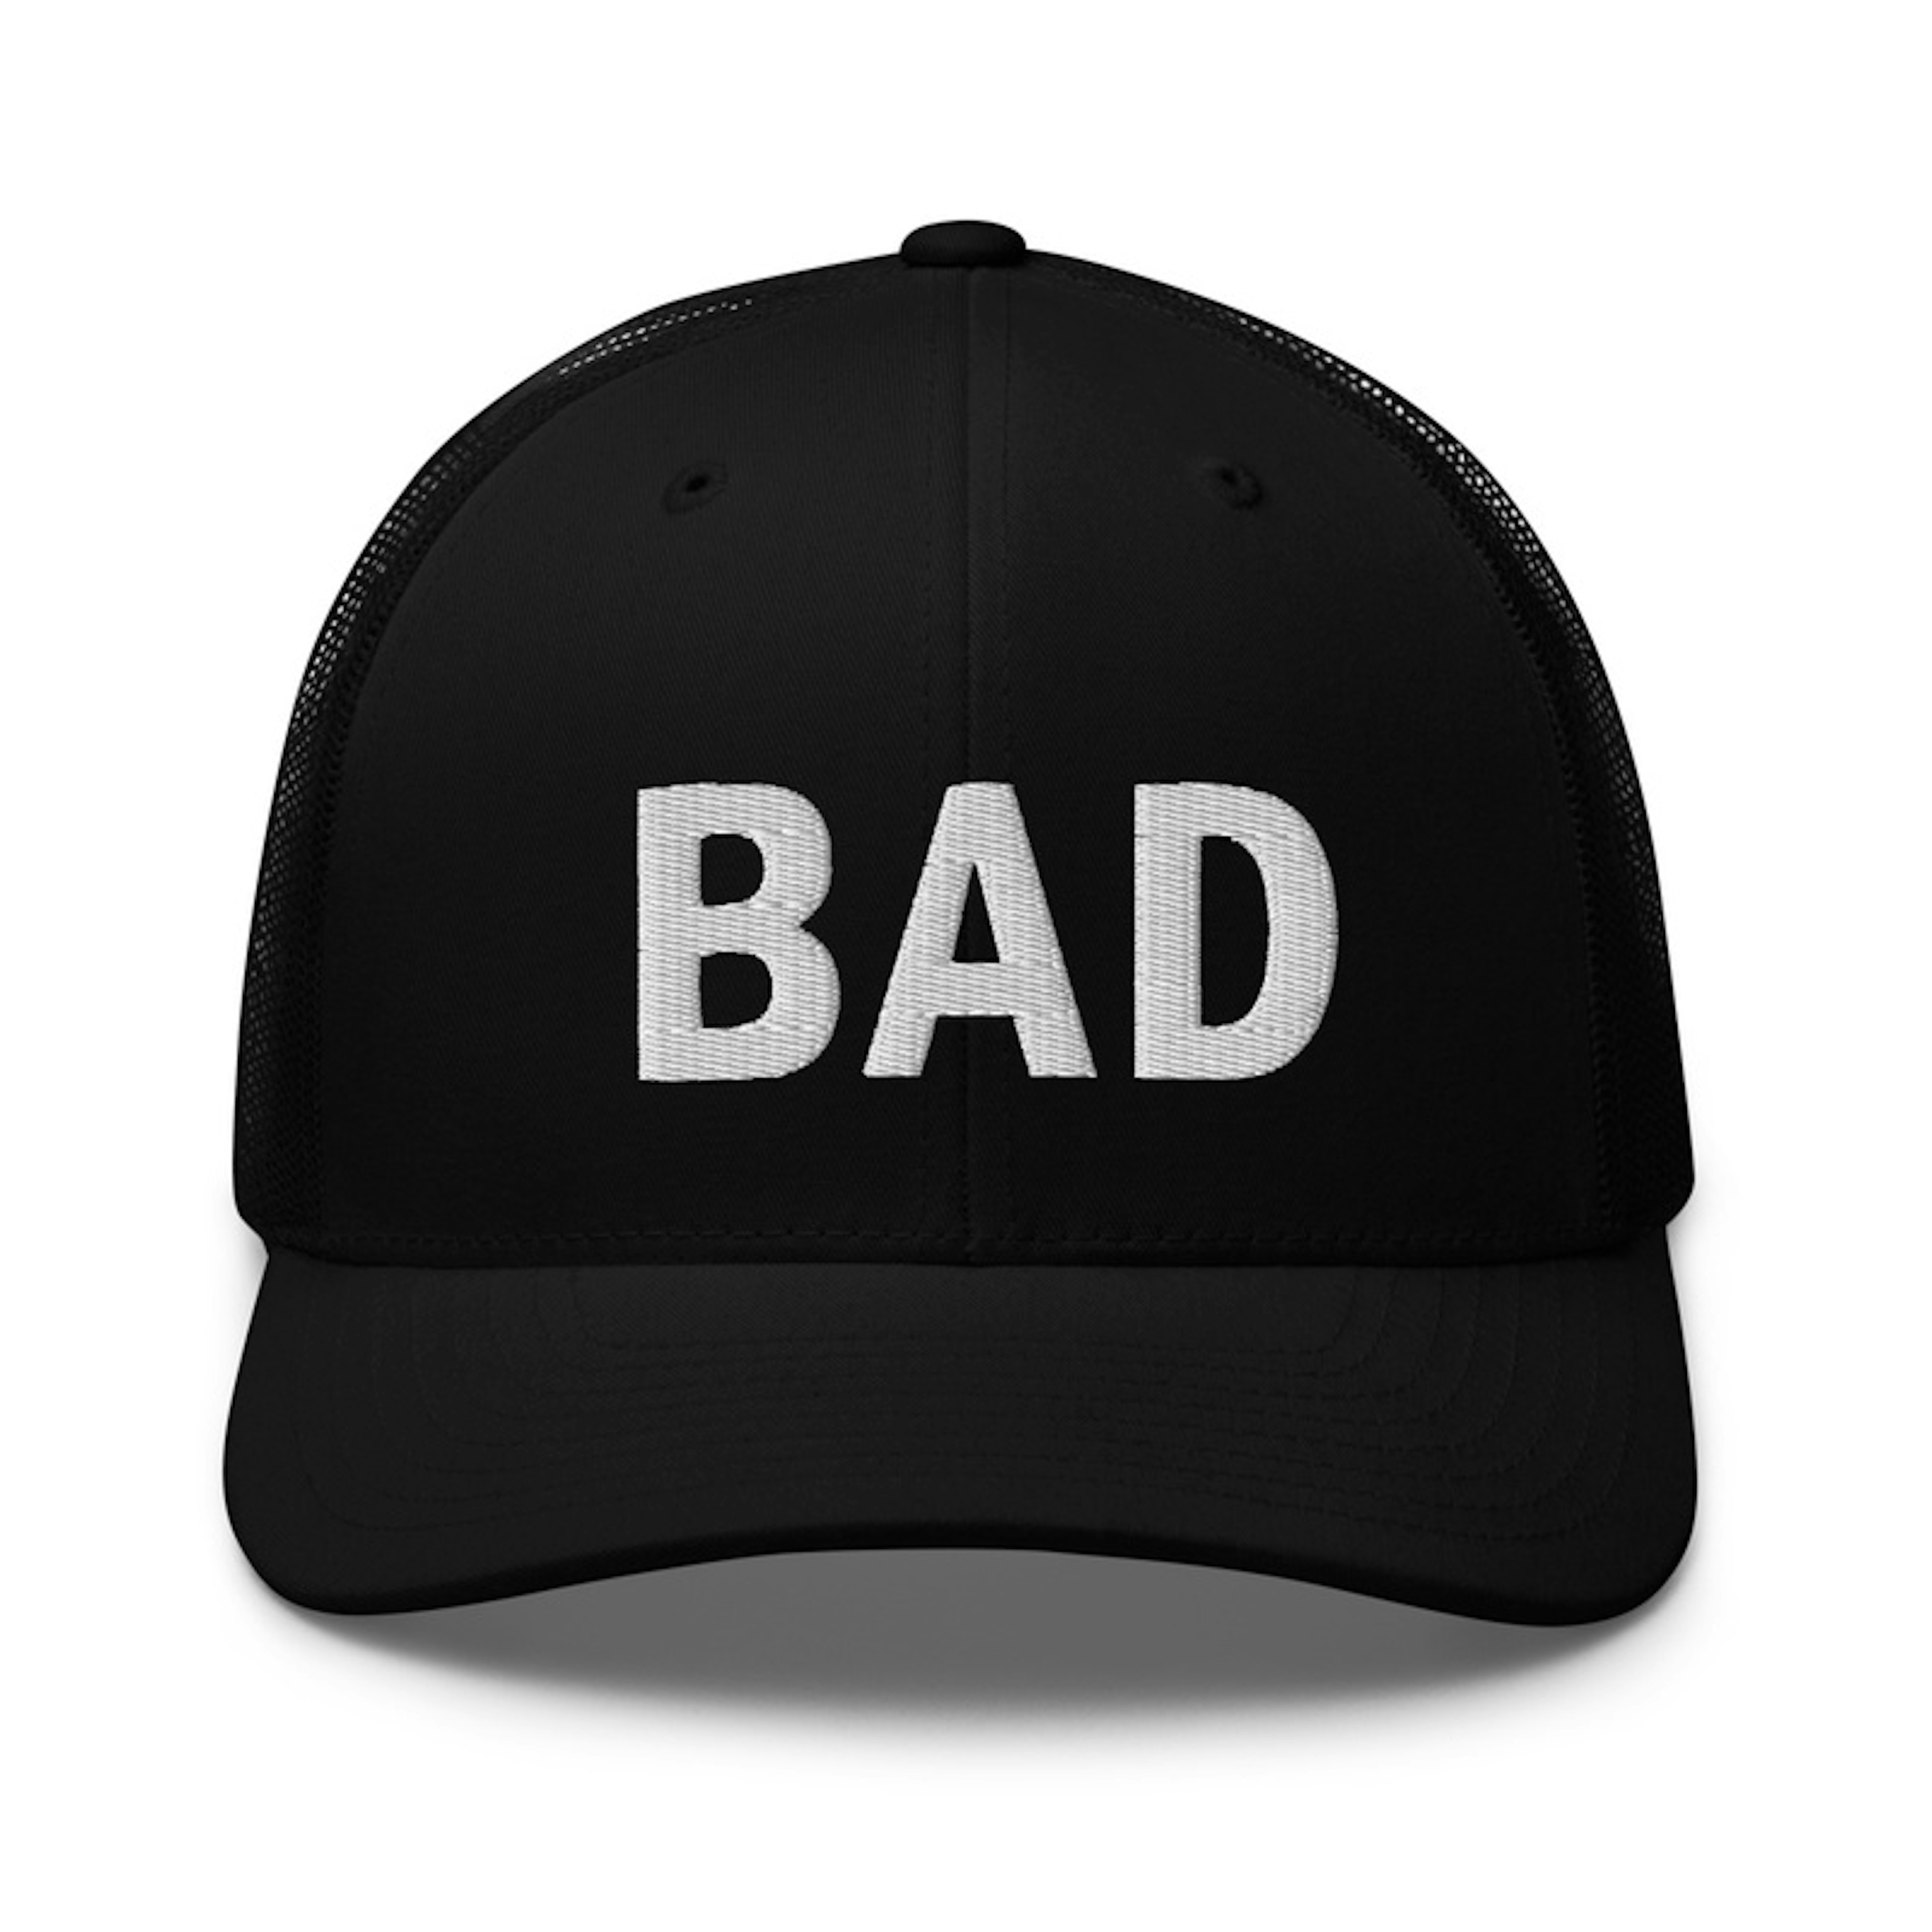 A Very BAD Hat